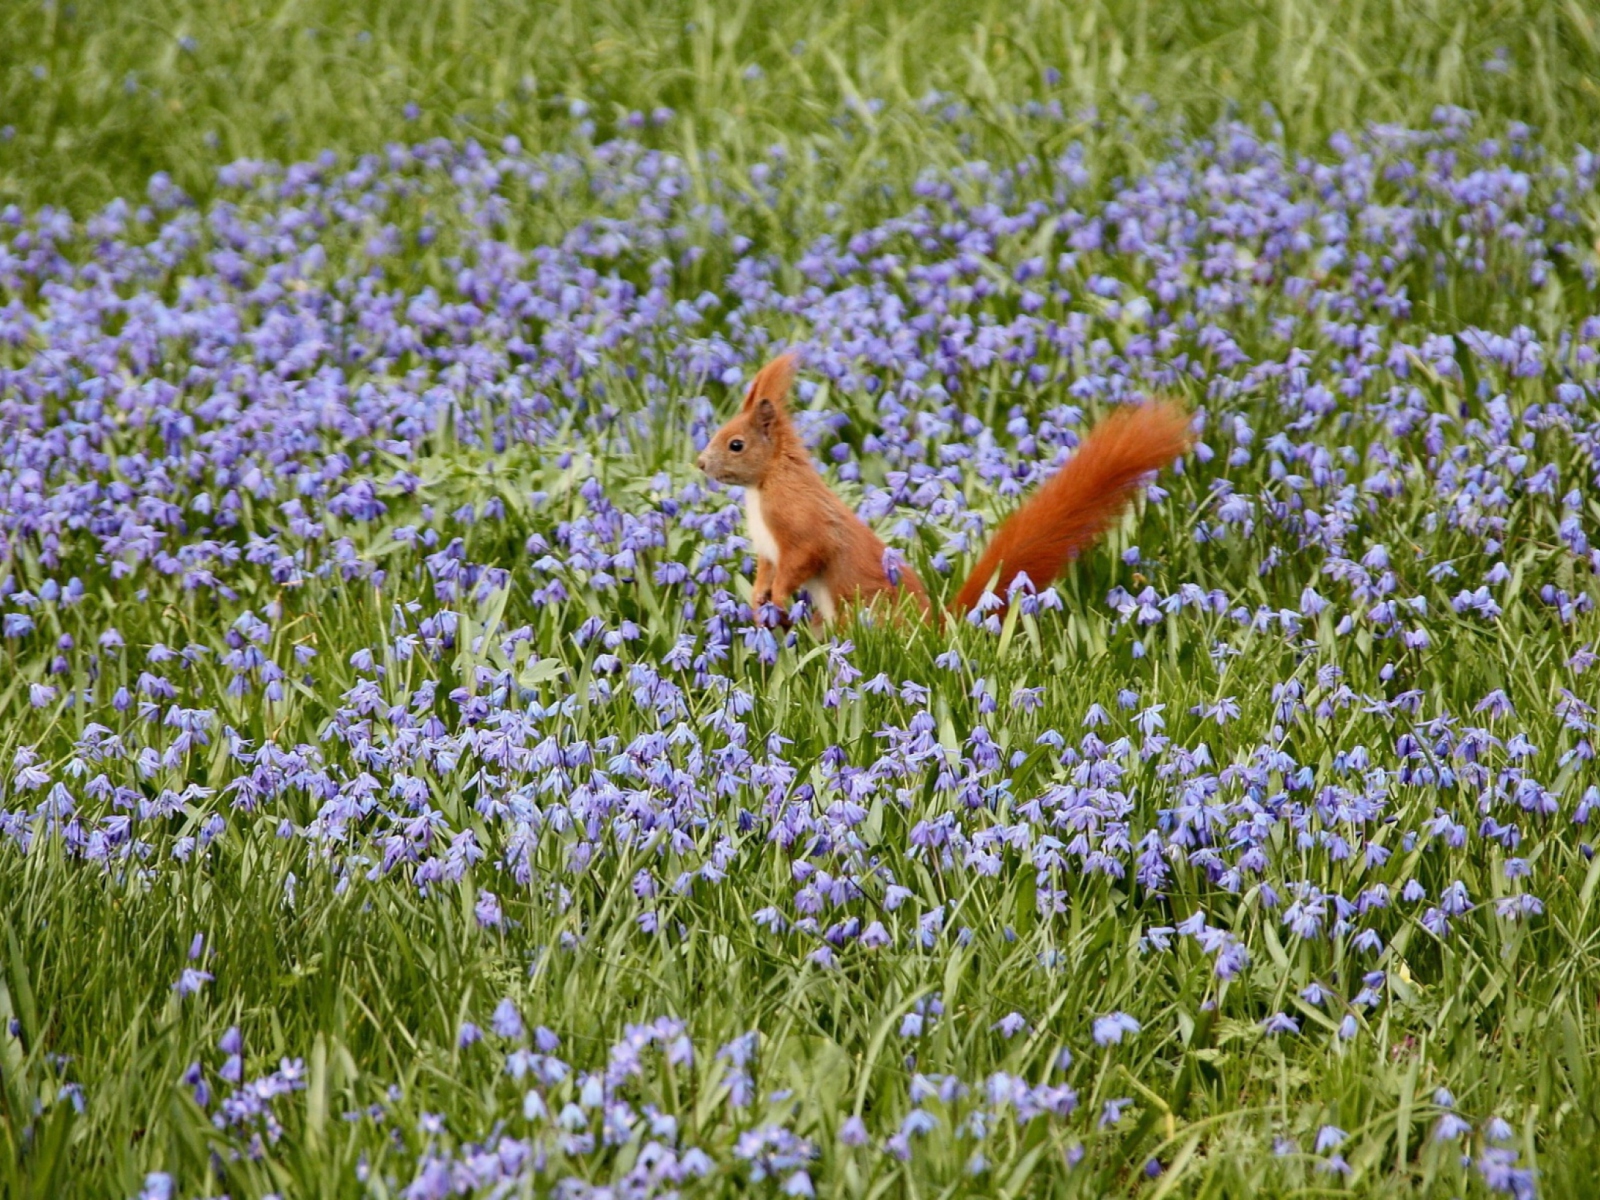 Squirrel And Blue Flowers wallpaper 1600x1200